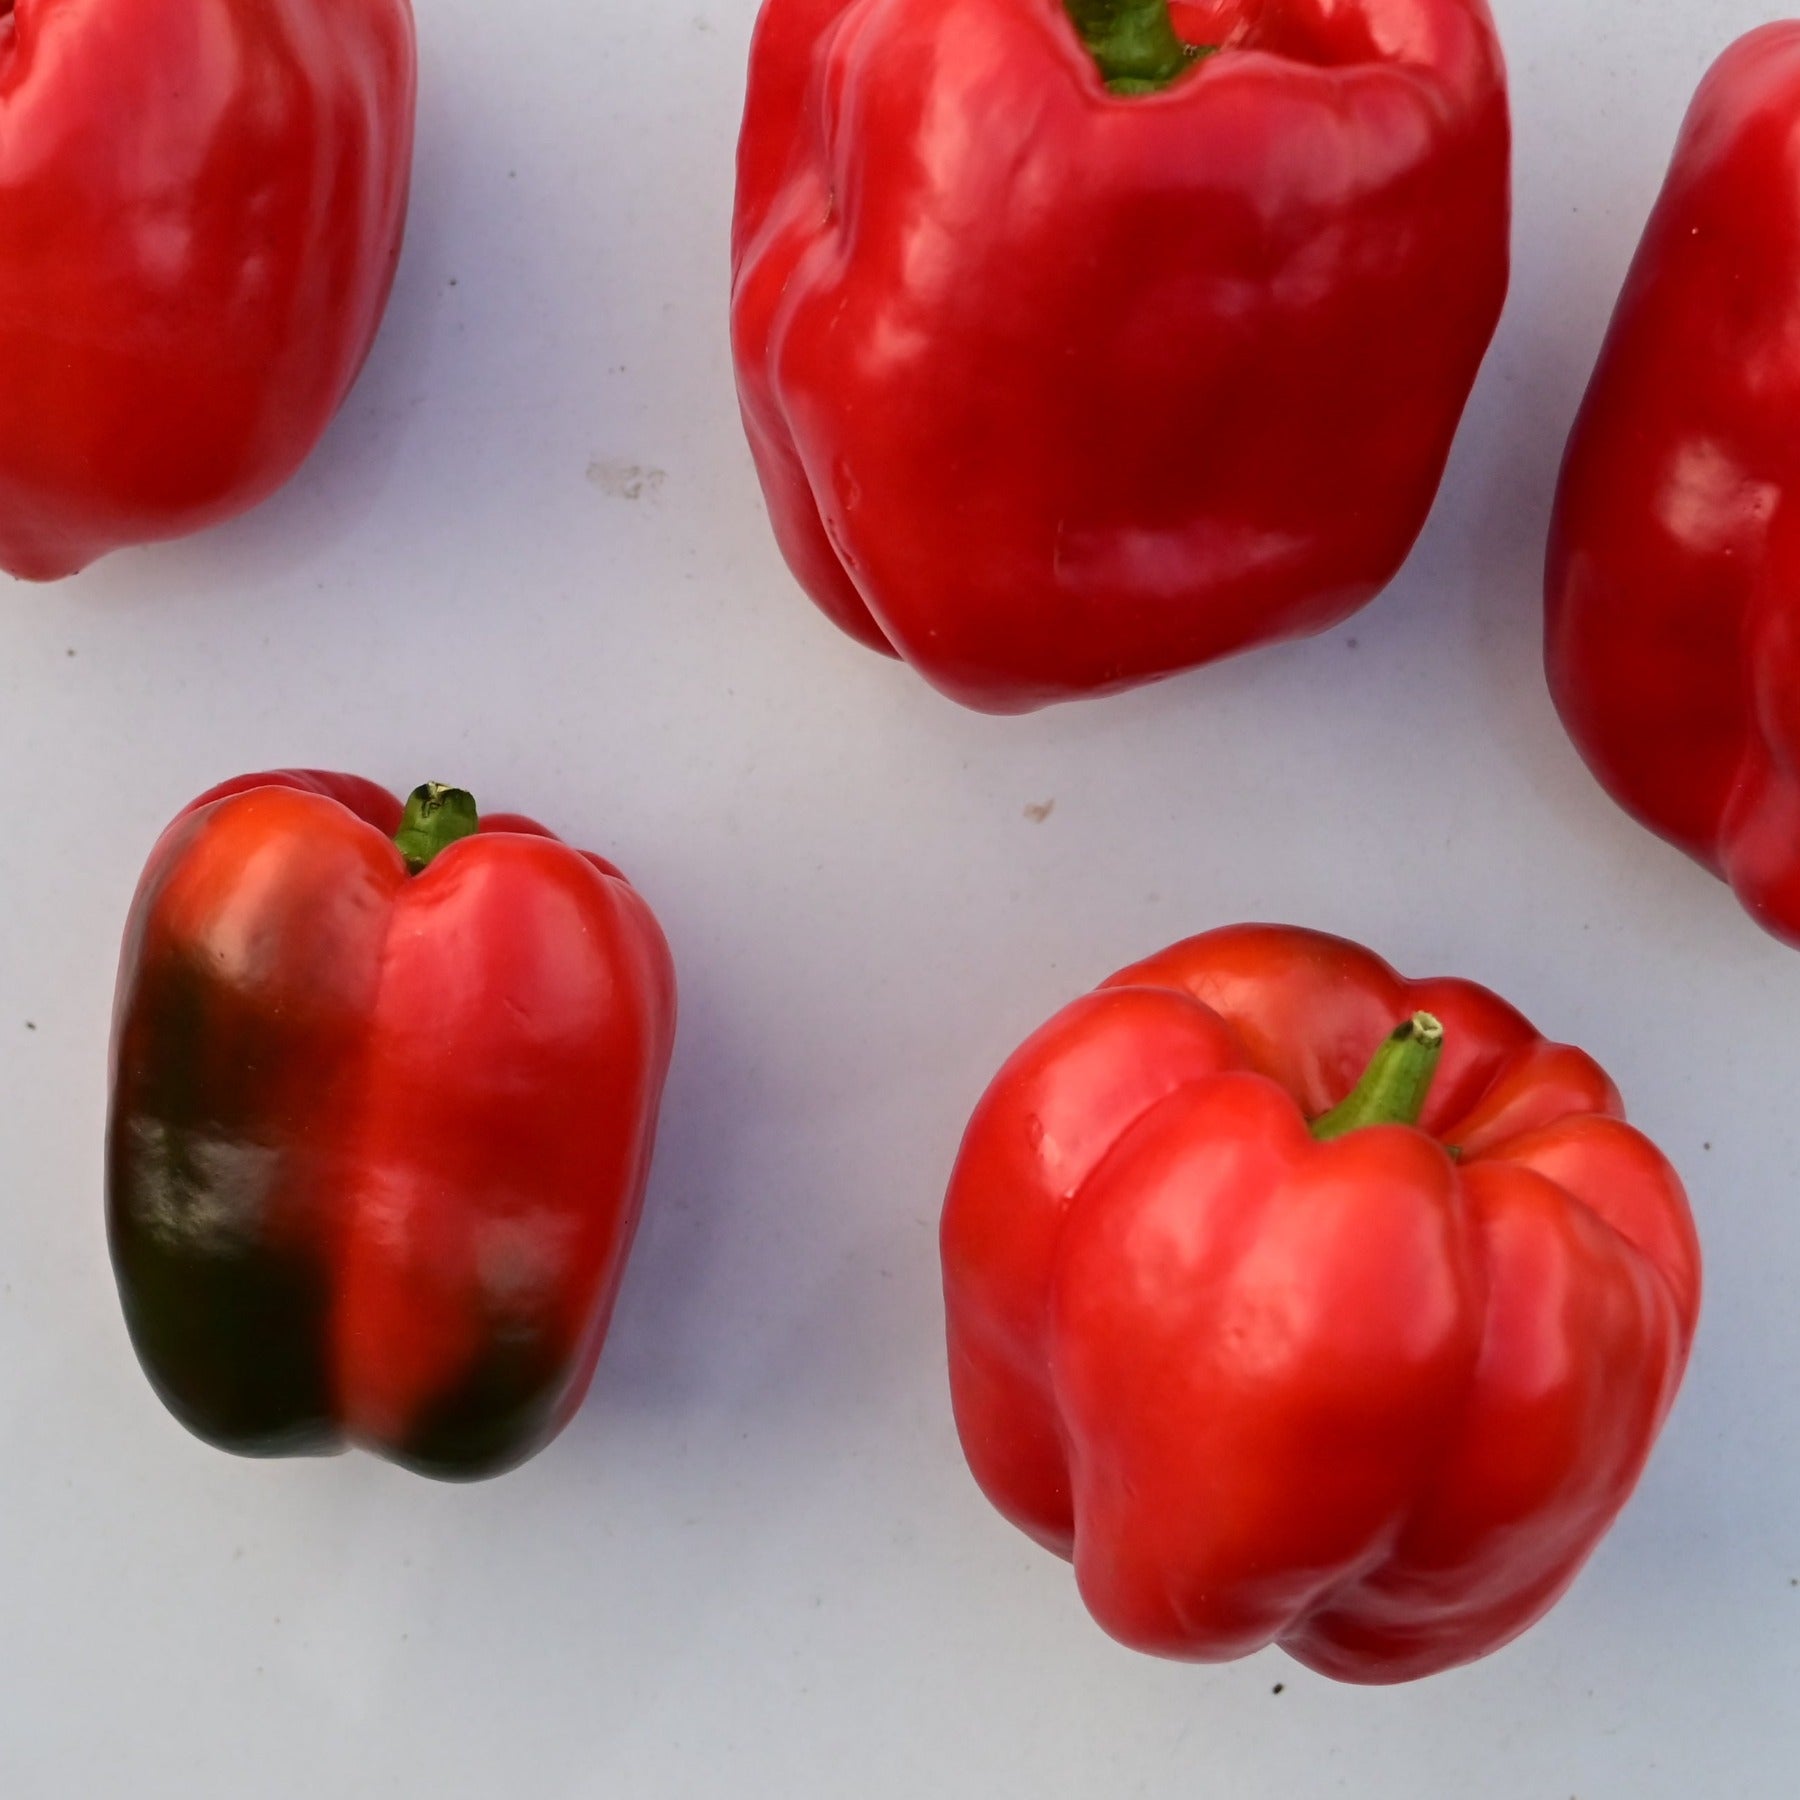 A group of Wisconsin Lakes red bell peppers against a white background